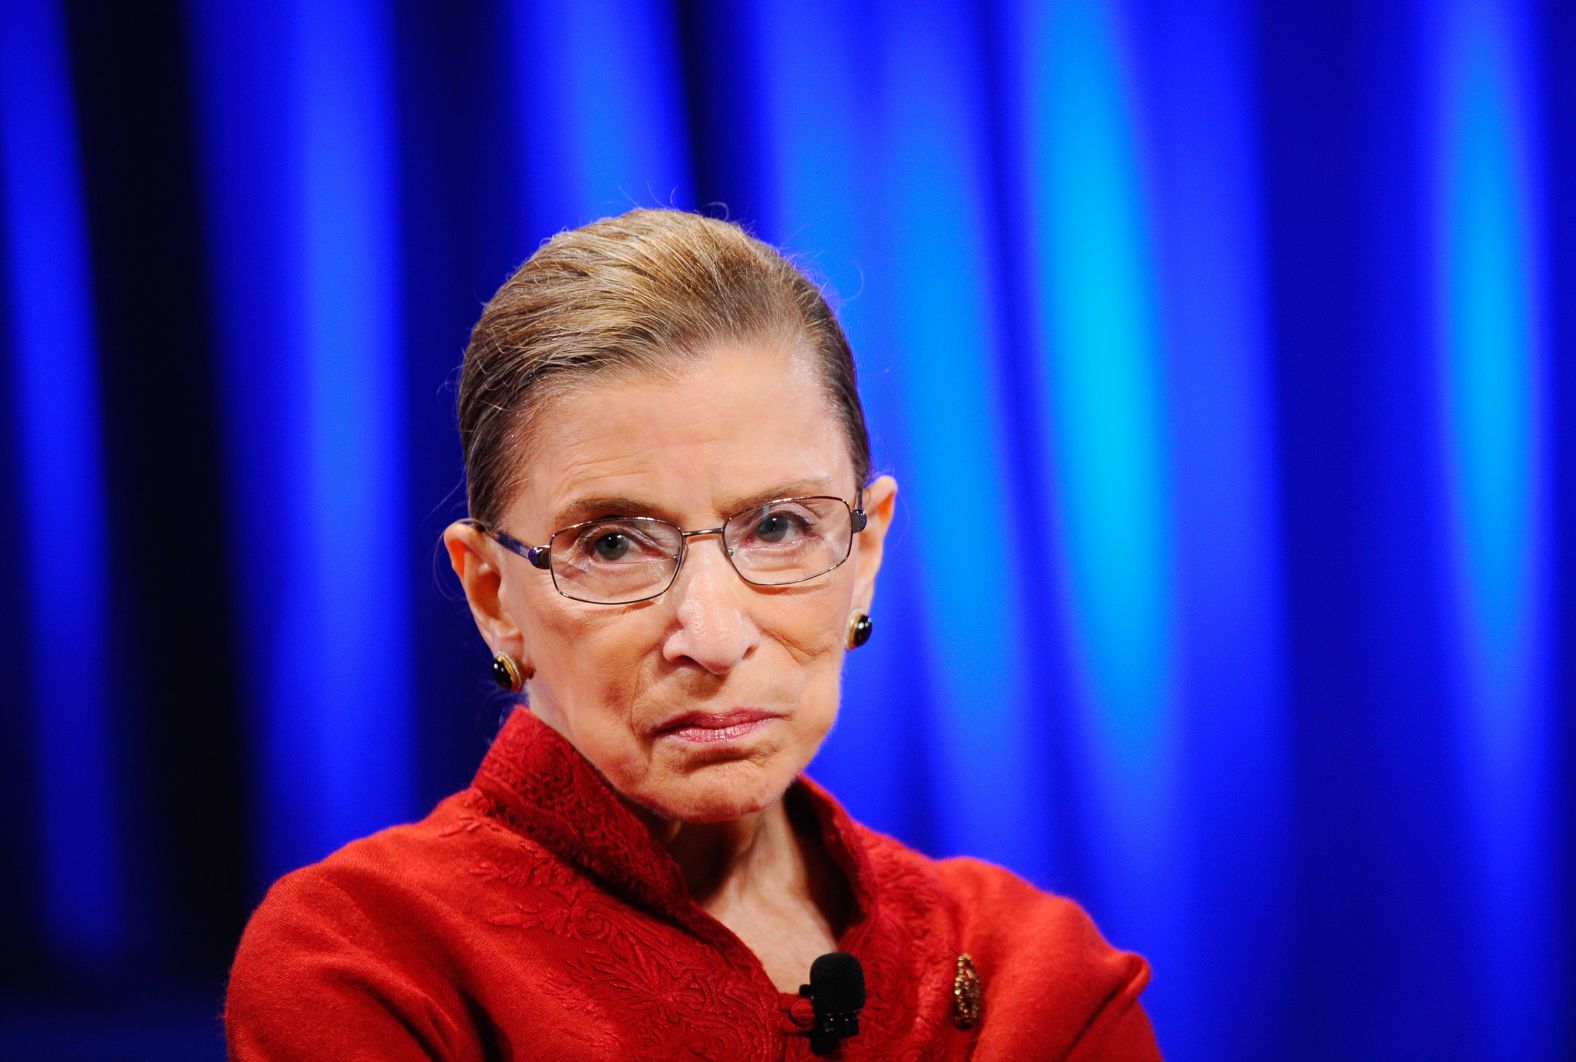 Supreme Court Justice <a href="https://www.cnn.com/2020/09/18/politics/ruth-bader-ginsburg-dead/index.html" target="_blank">Ruth Bader Ginsburg</a> died September 18 due to complications of metastatic pancreas cancer, the court announced. She was 87. Ginsburg, the second woman to serve on the US Supreme Court, was appointed in 1993 by President Bill Clinton and in recent years served as the most senior member of the court's liberal wing.